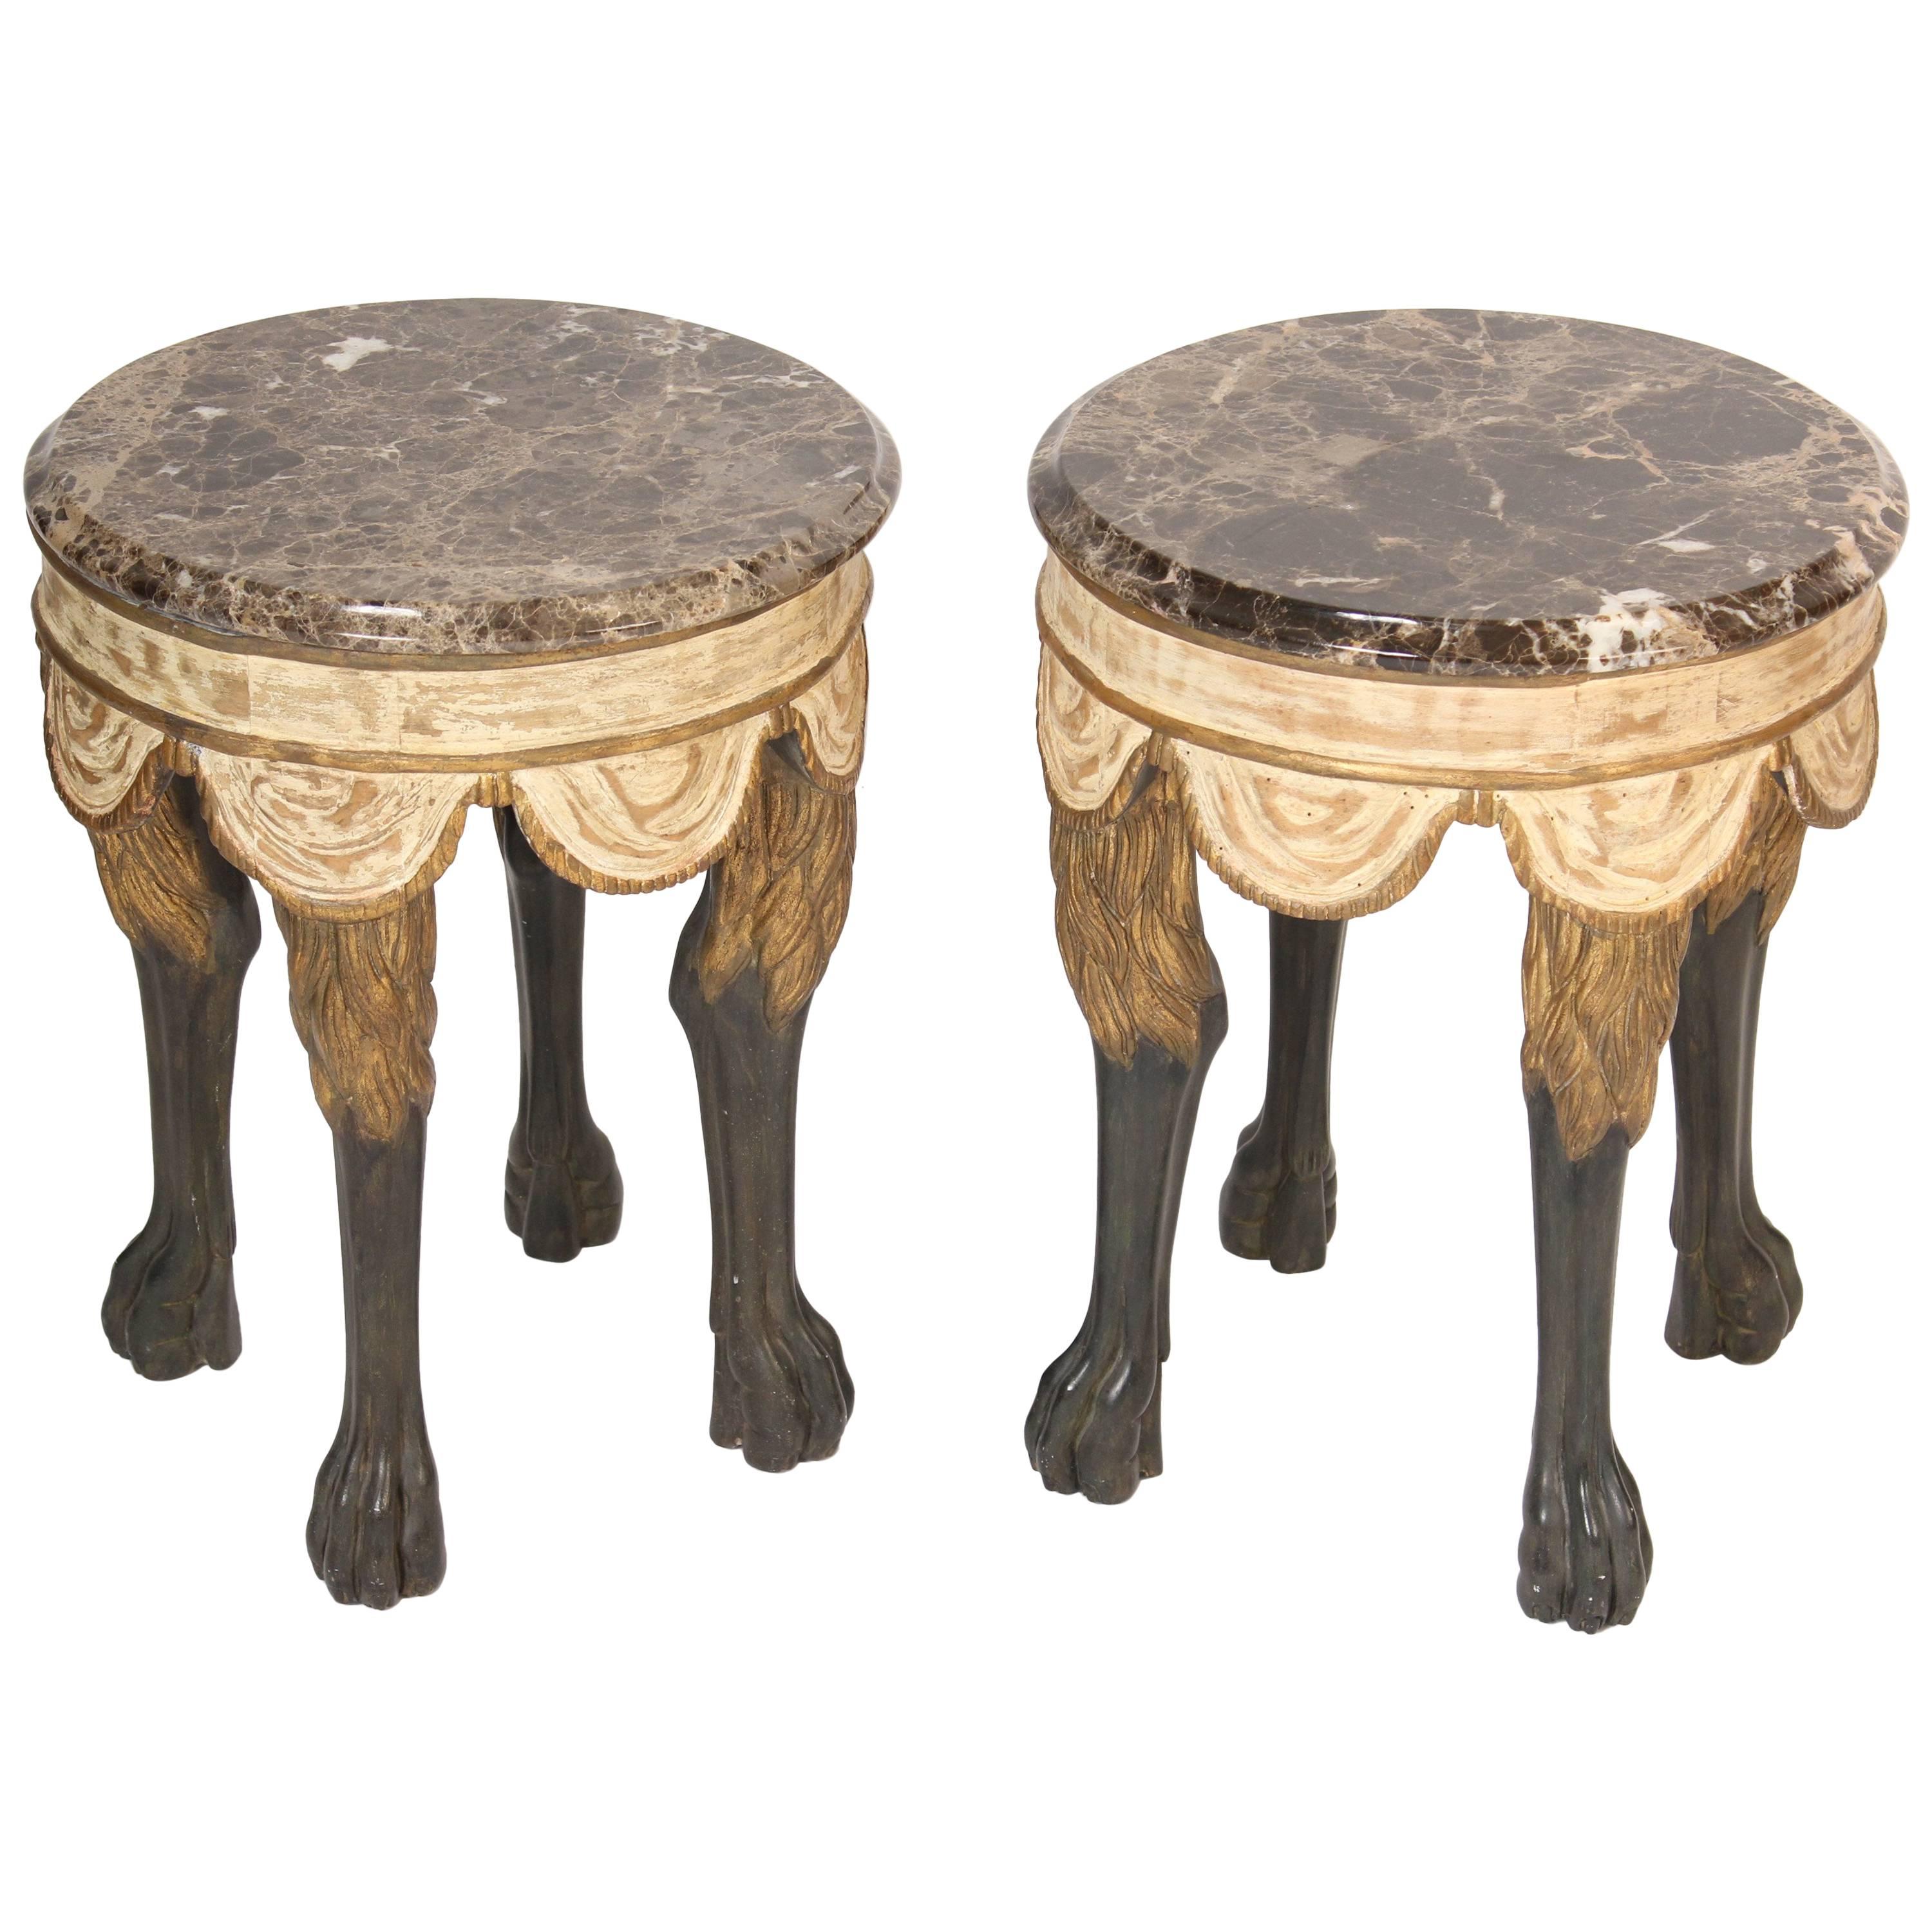 Pair of Continental Neoclassical Style Marble Top Occasional Tables